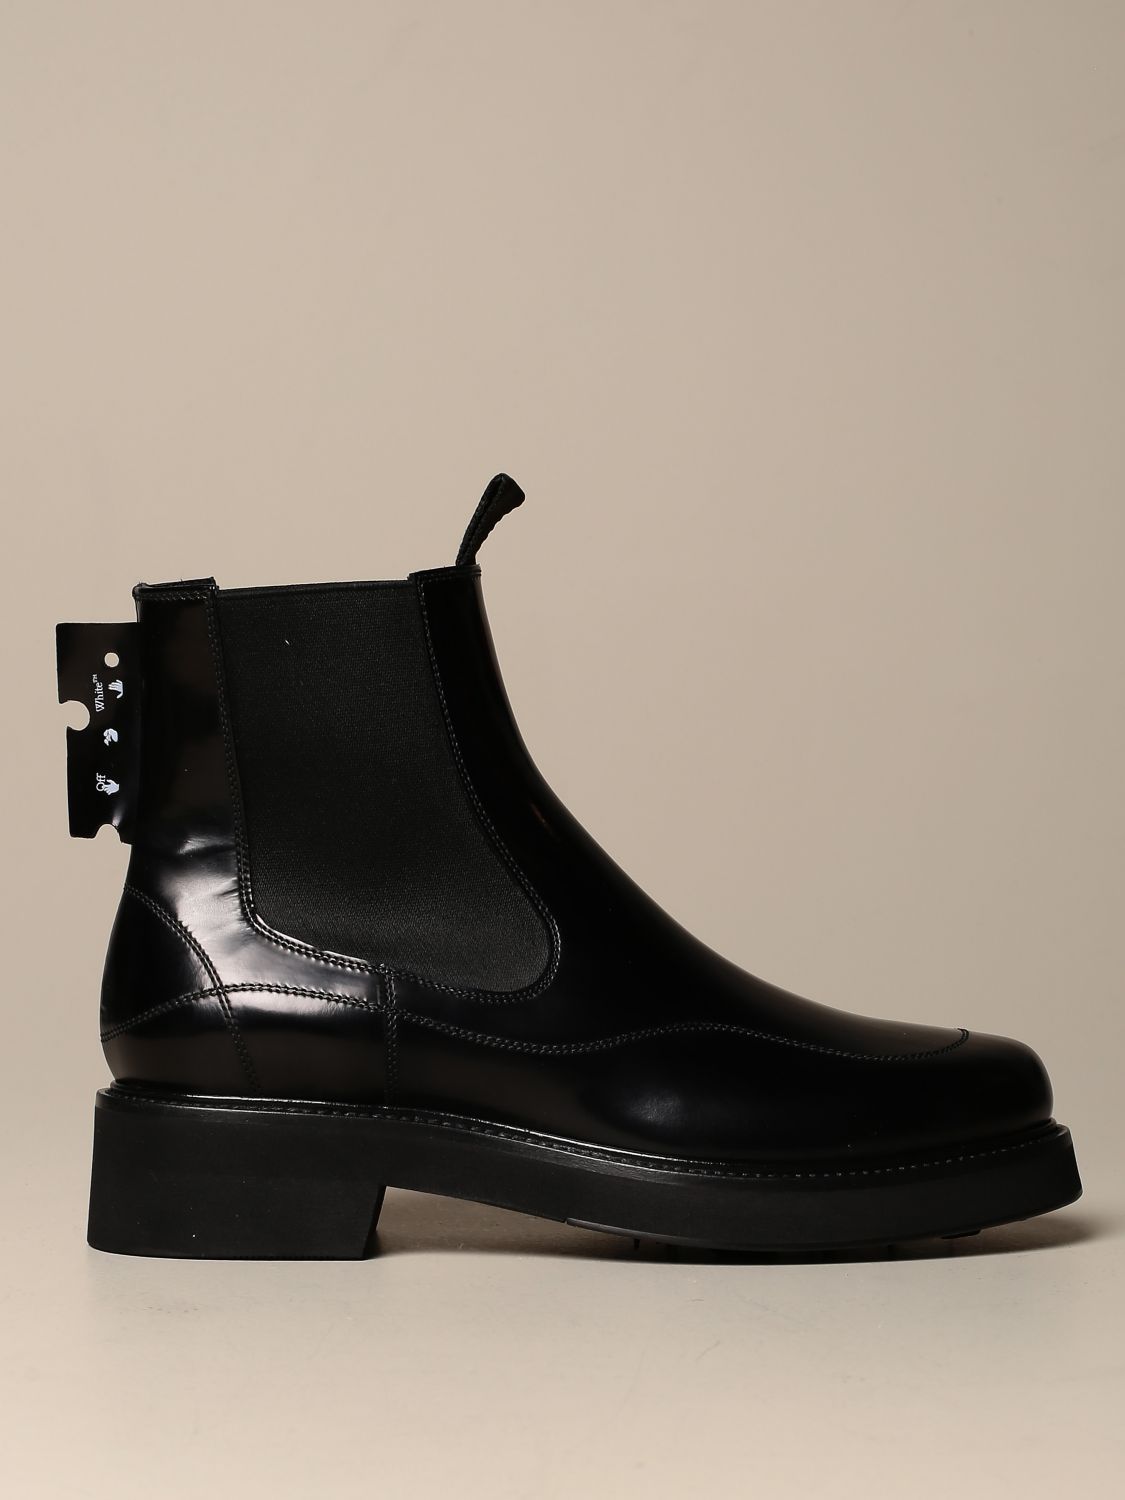 Off-White Outlet: Off White Chealsea leather slip on boot - Black | Off ...